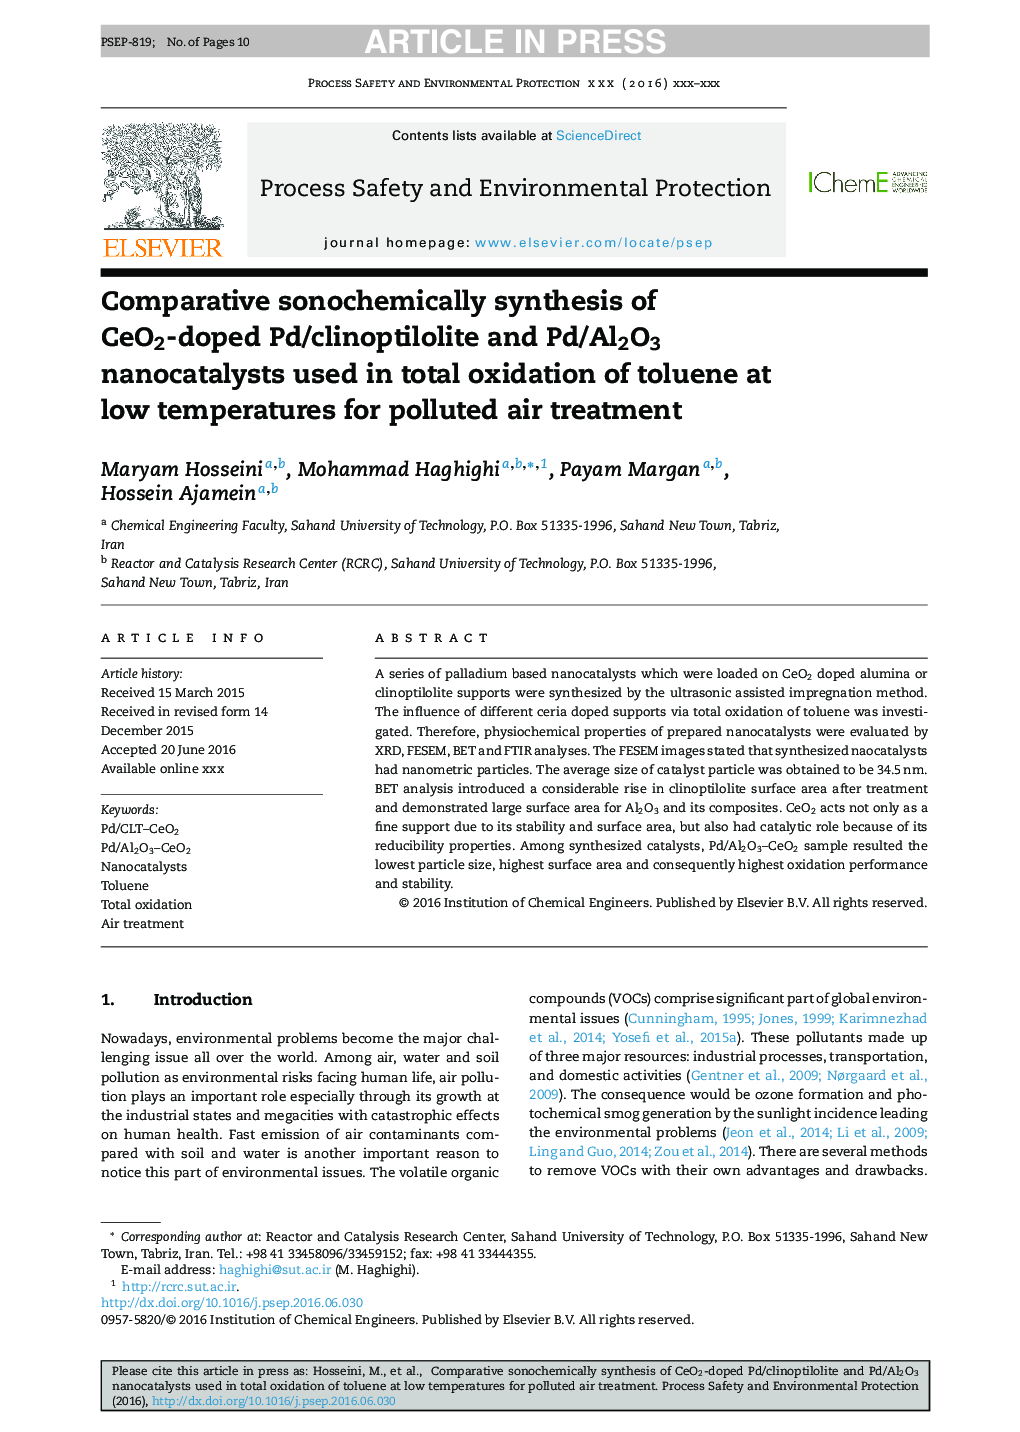 Comparative sonochemically synthesis of CeO2-doped Pd/clinoptilolite and Pd/Al2O3 nanocatalysts used in total oxidation of toluene at low temperatures for polluted air treatment